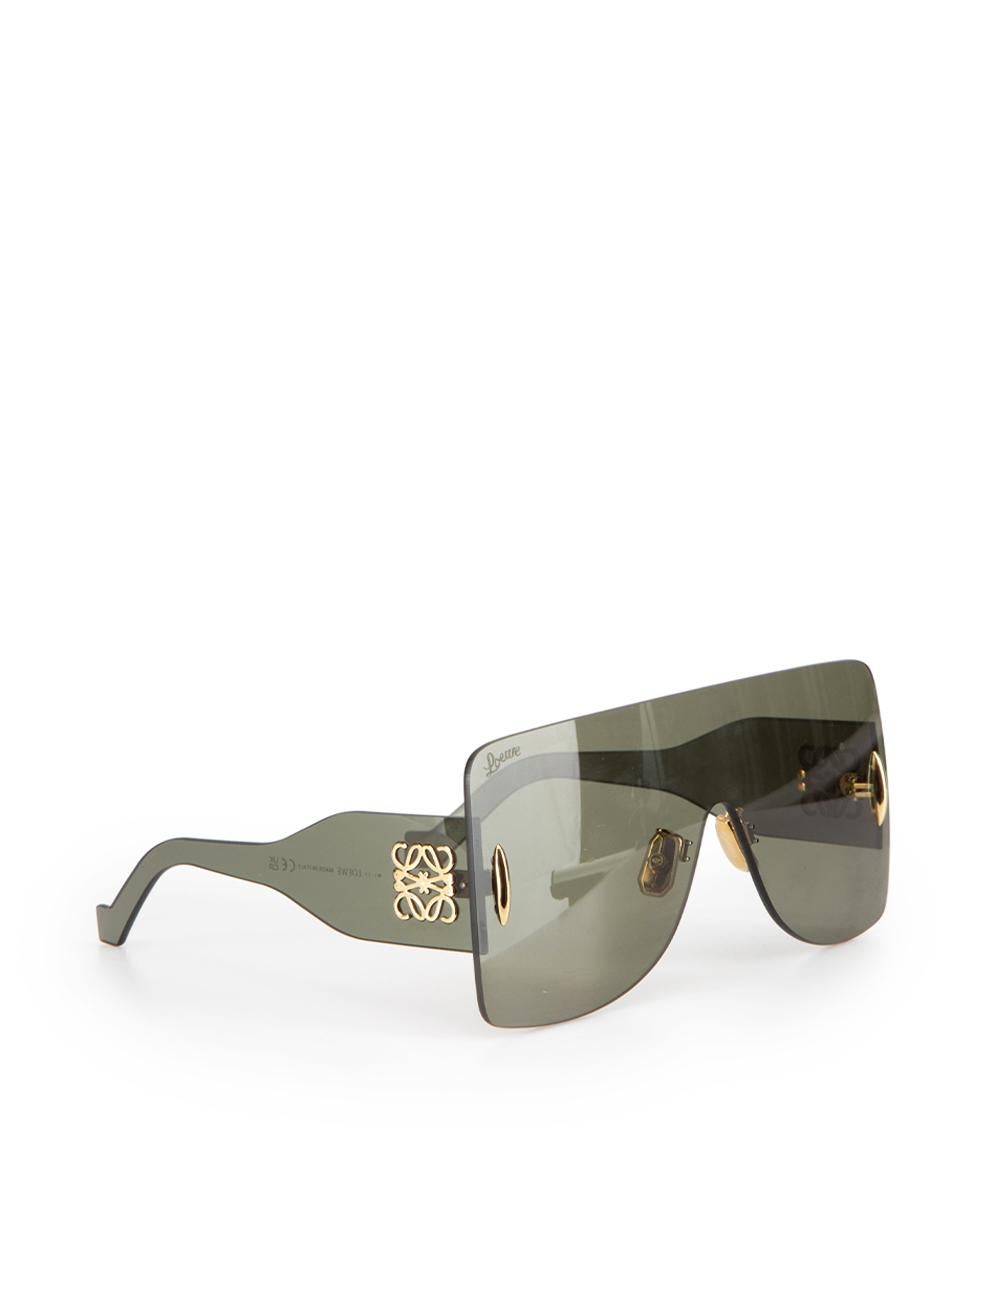 CONDITION is Very good. Hardly any visible wear to sunglasses is evident on this used Loewe designer resale item. These sunglasses come in original case.



Details


Green

Shield sunglasses

Acrylic

Gold Loewe logo embellishment on the